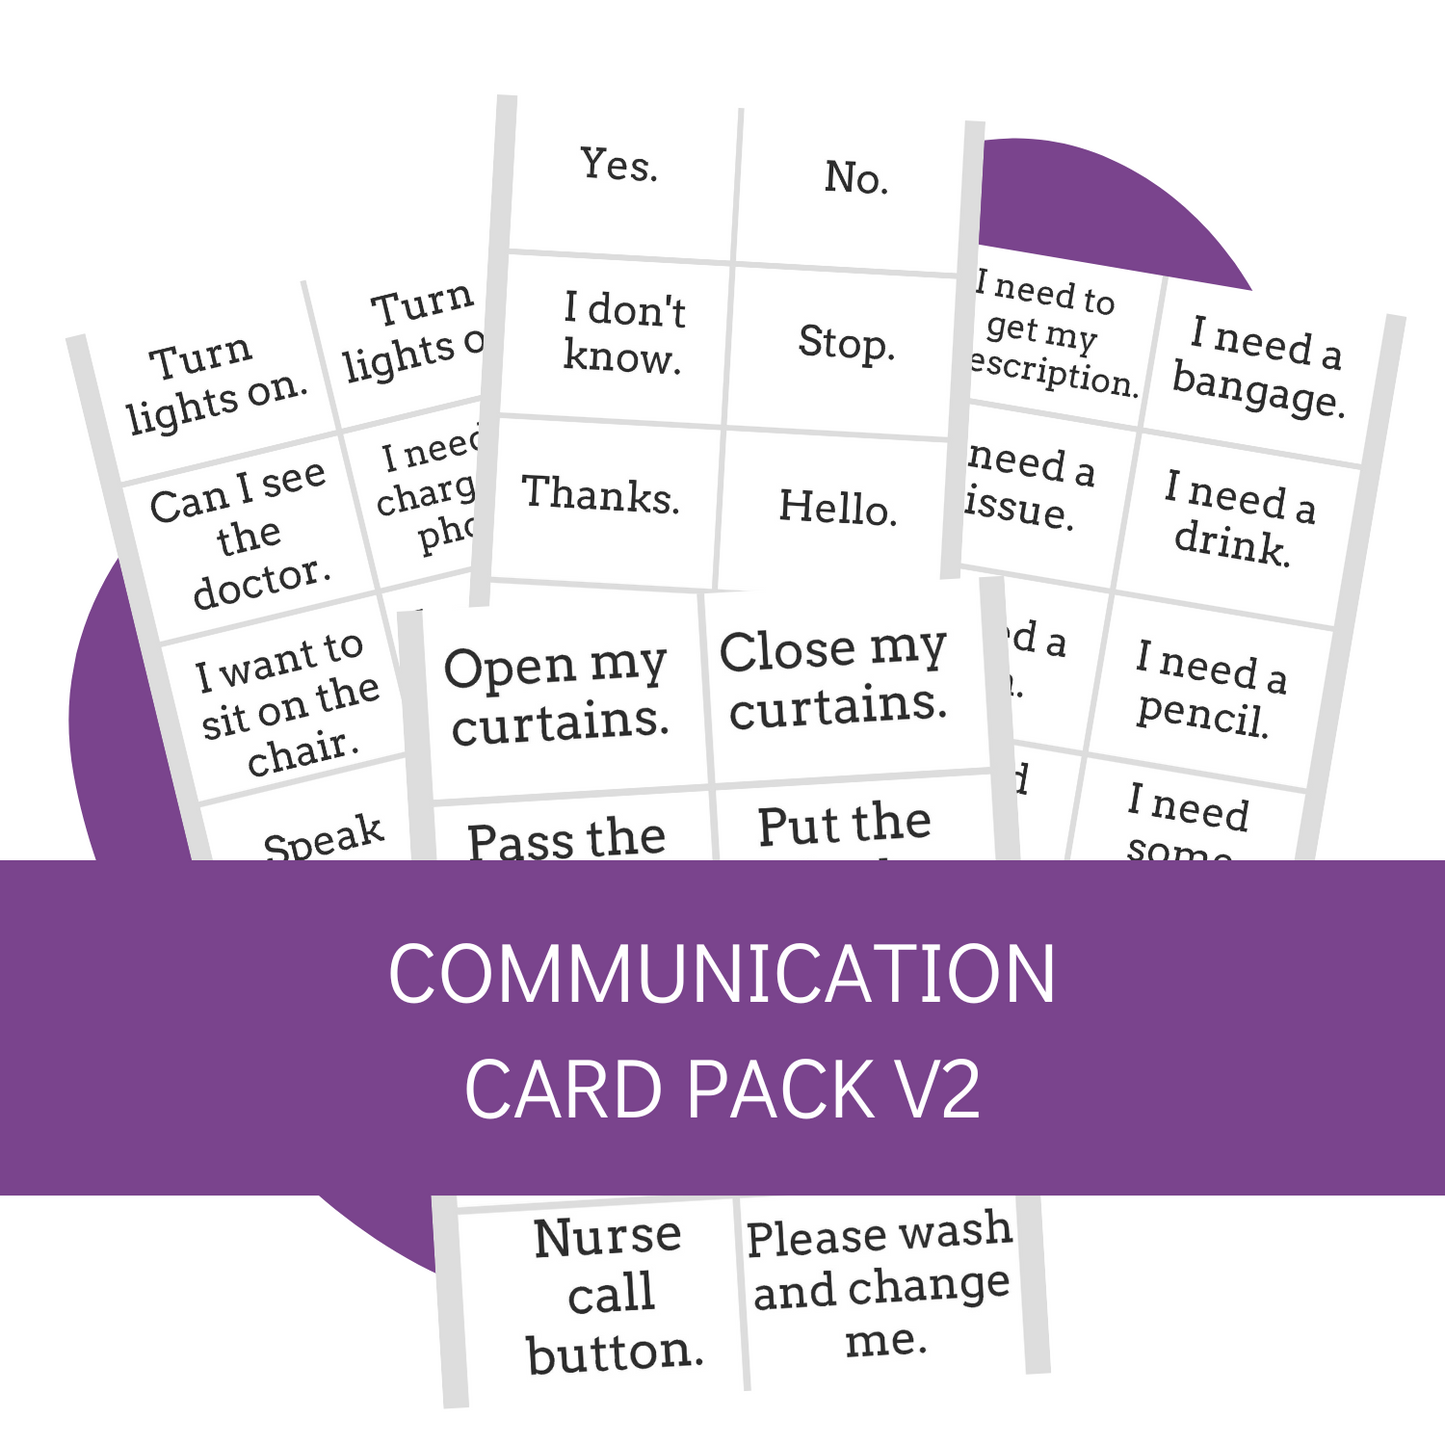 Common Communication Cards - Text Only